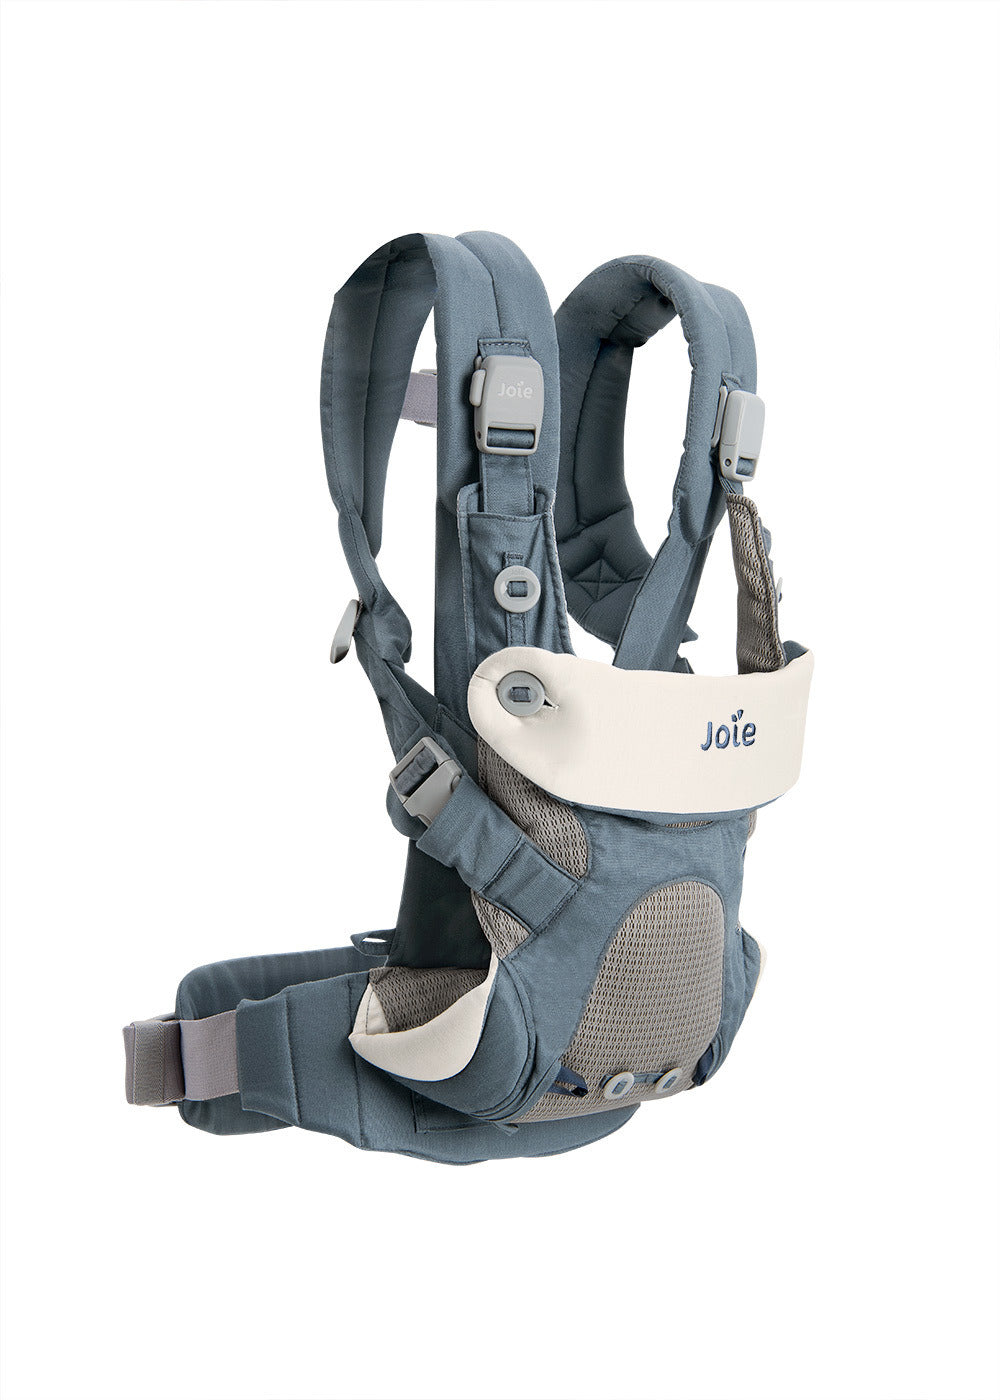 JOIE Baby Carrier Savvy Marina Birth+ to 16 kg